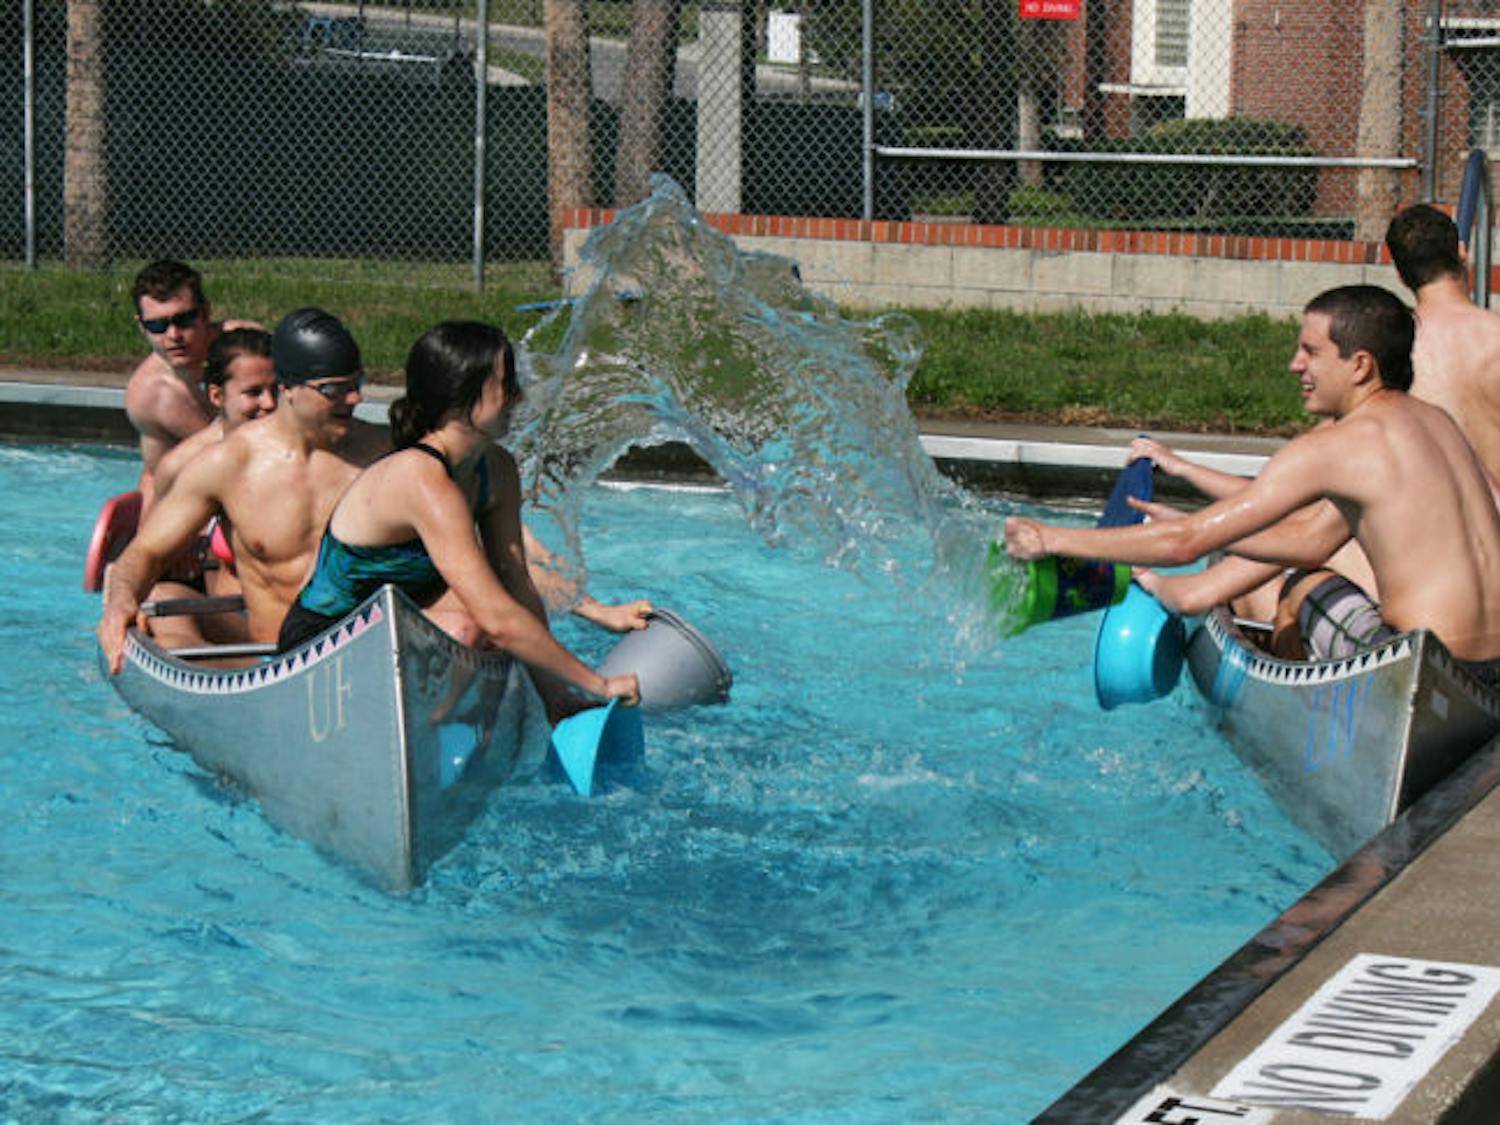 UF students cool down as they try to sink opposing teams during Battleship, an event hosted by the Department of Recreational Sports on Saturday.